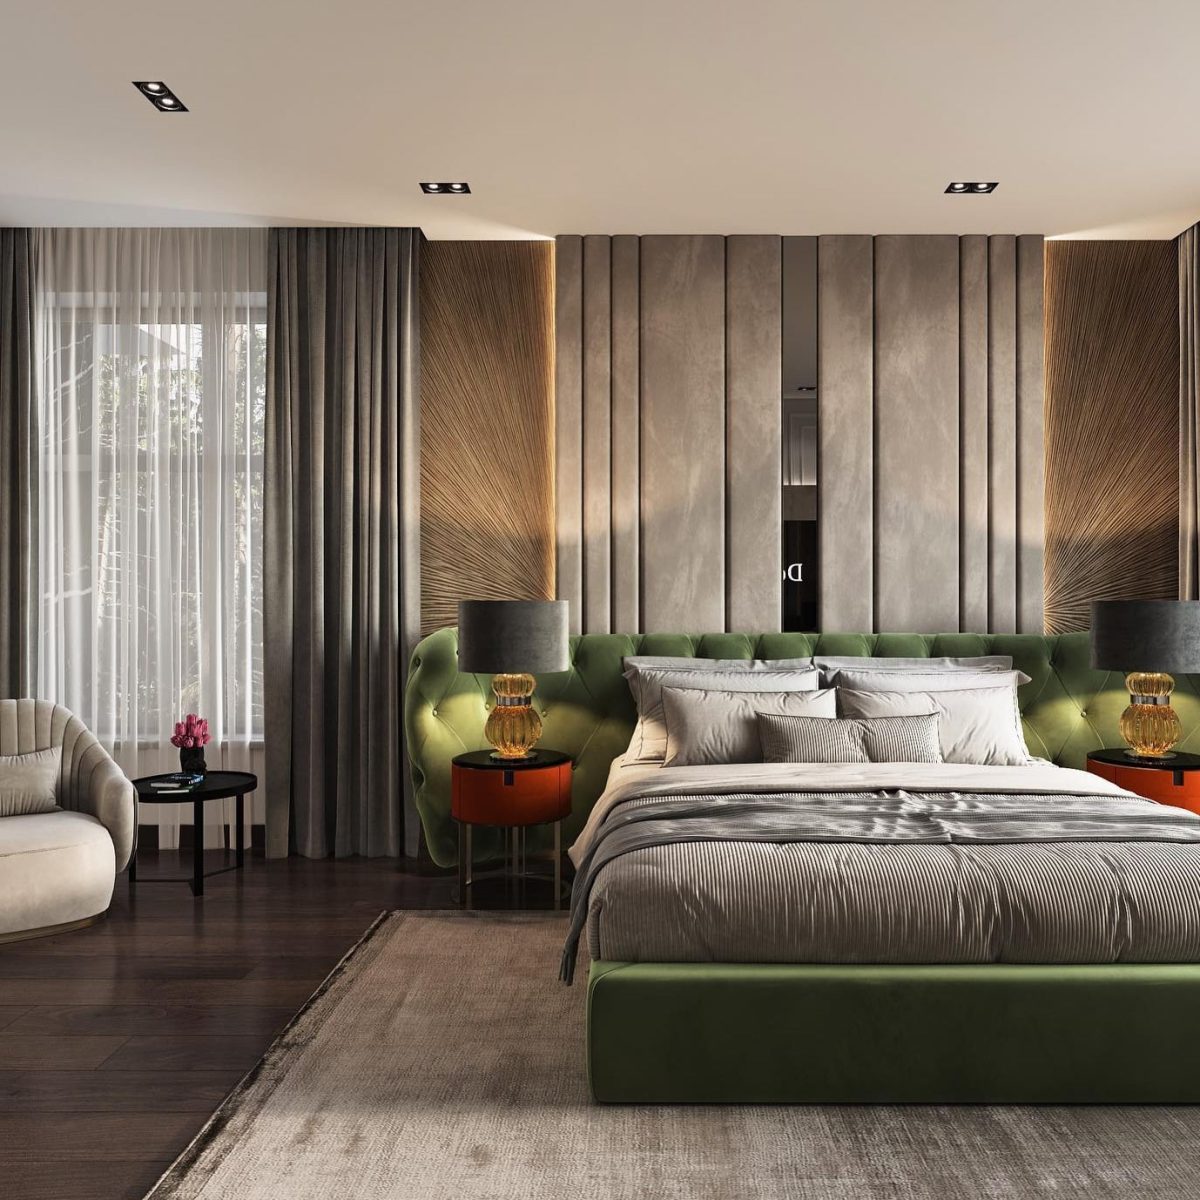 A modern bedroom with green accents and wooden floors, furnished with a bespoke Mr Wardrobe from London.